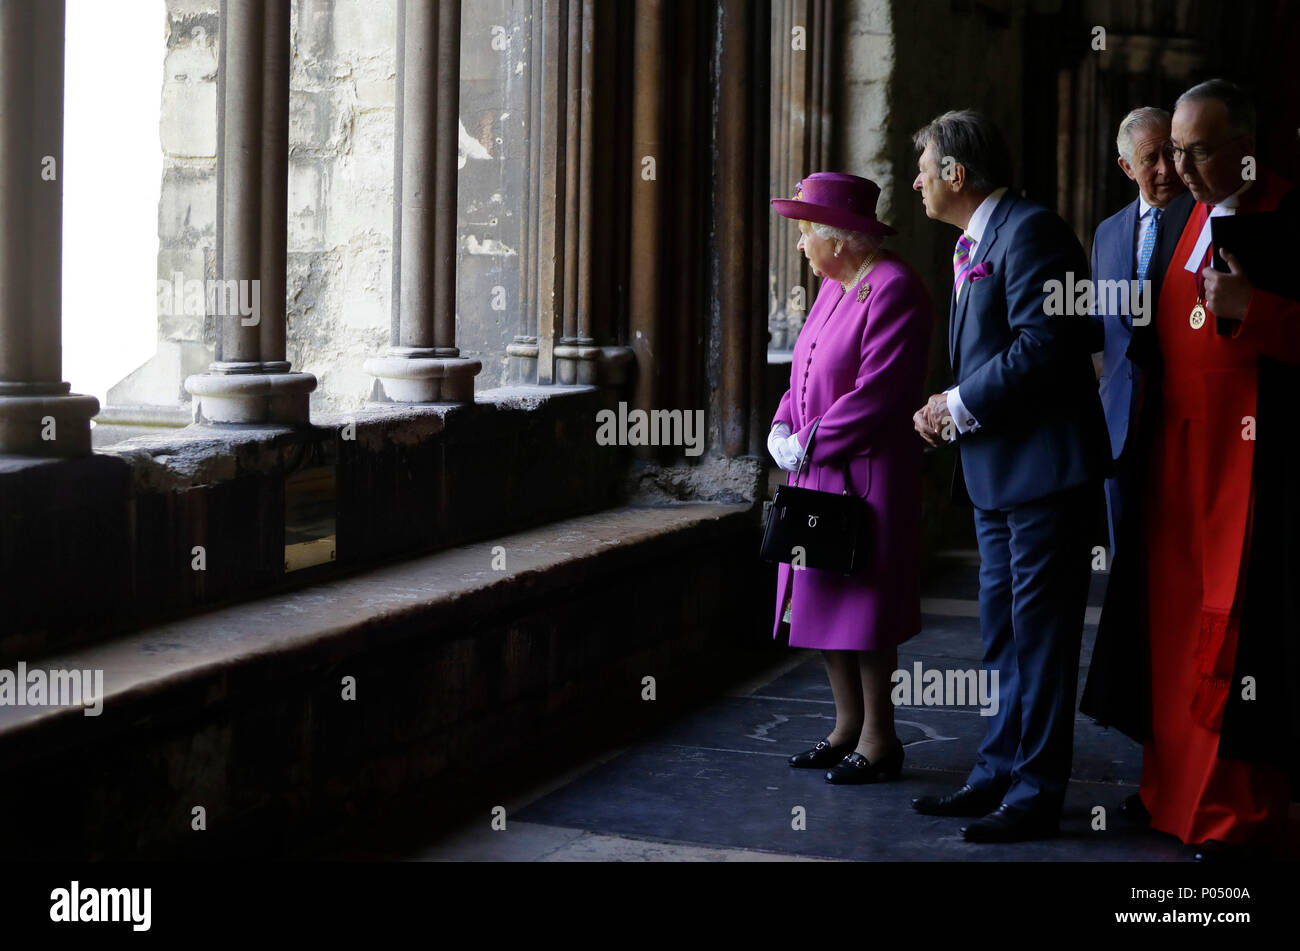 Queen Elizabeth II with celebrity gardener Alan Titchmarsh, walks through the cloisters after opening The Queen's Diamond Jubilee Galleries at Westminster Abbey in London. Stock Photo